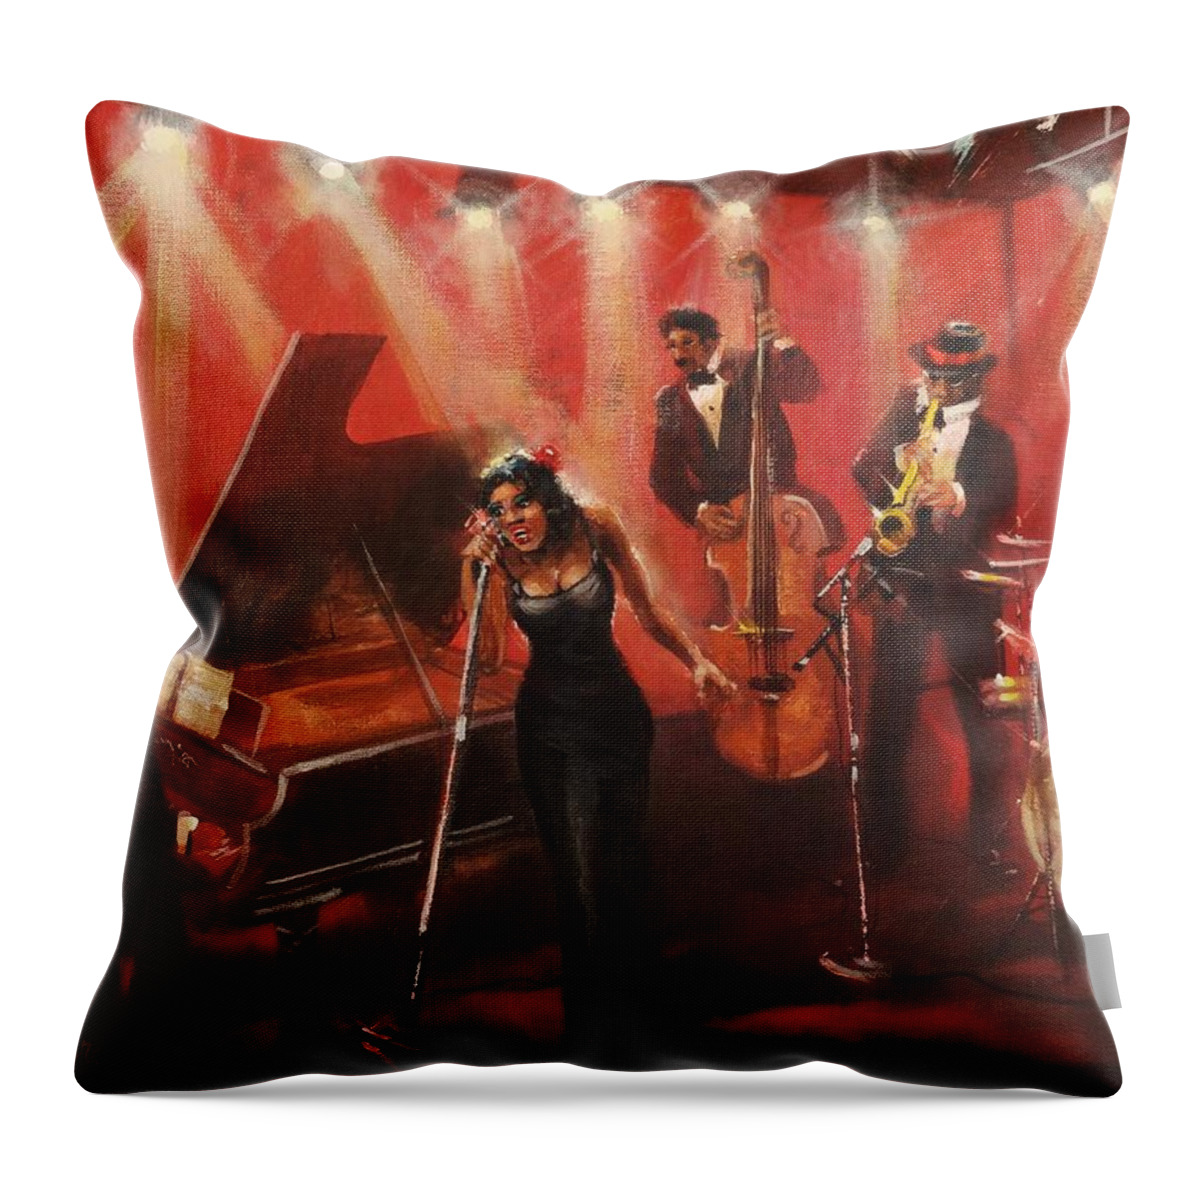 Cotton Club Throw Pillow featuring the painting The Cotton Club by Tom Shropshire